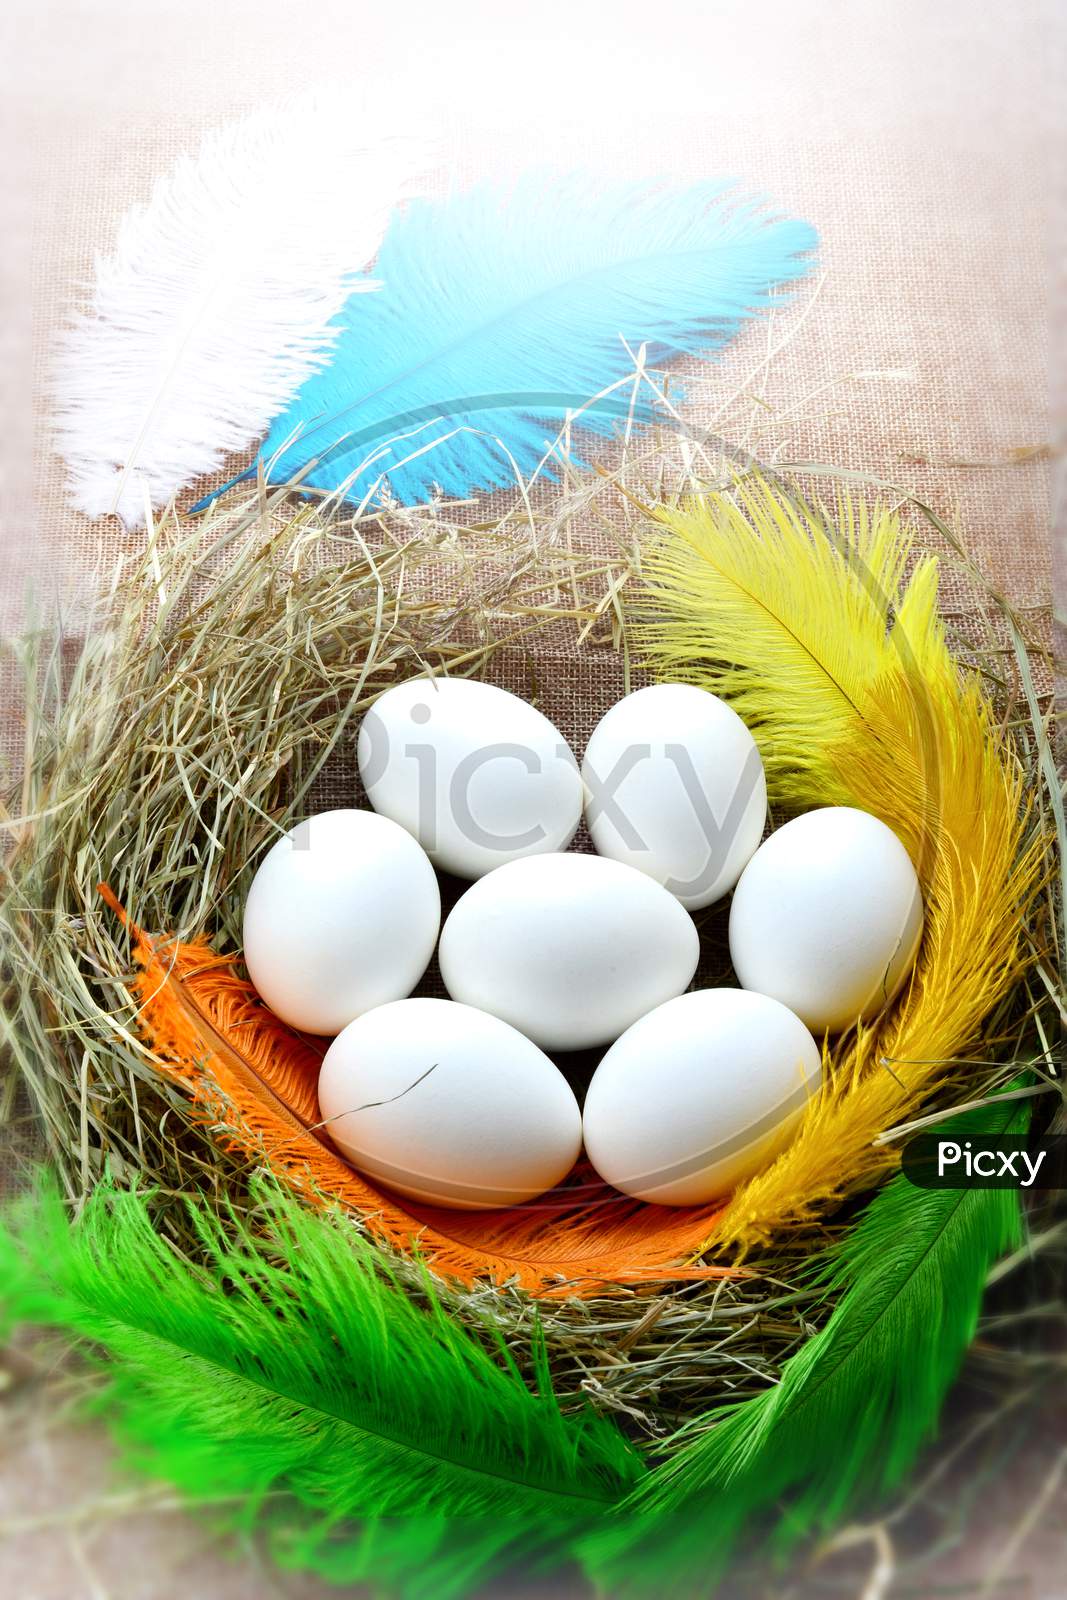 Colorful nest with seven white eggs